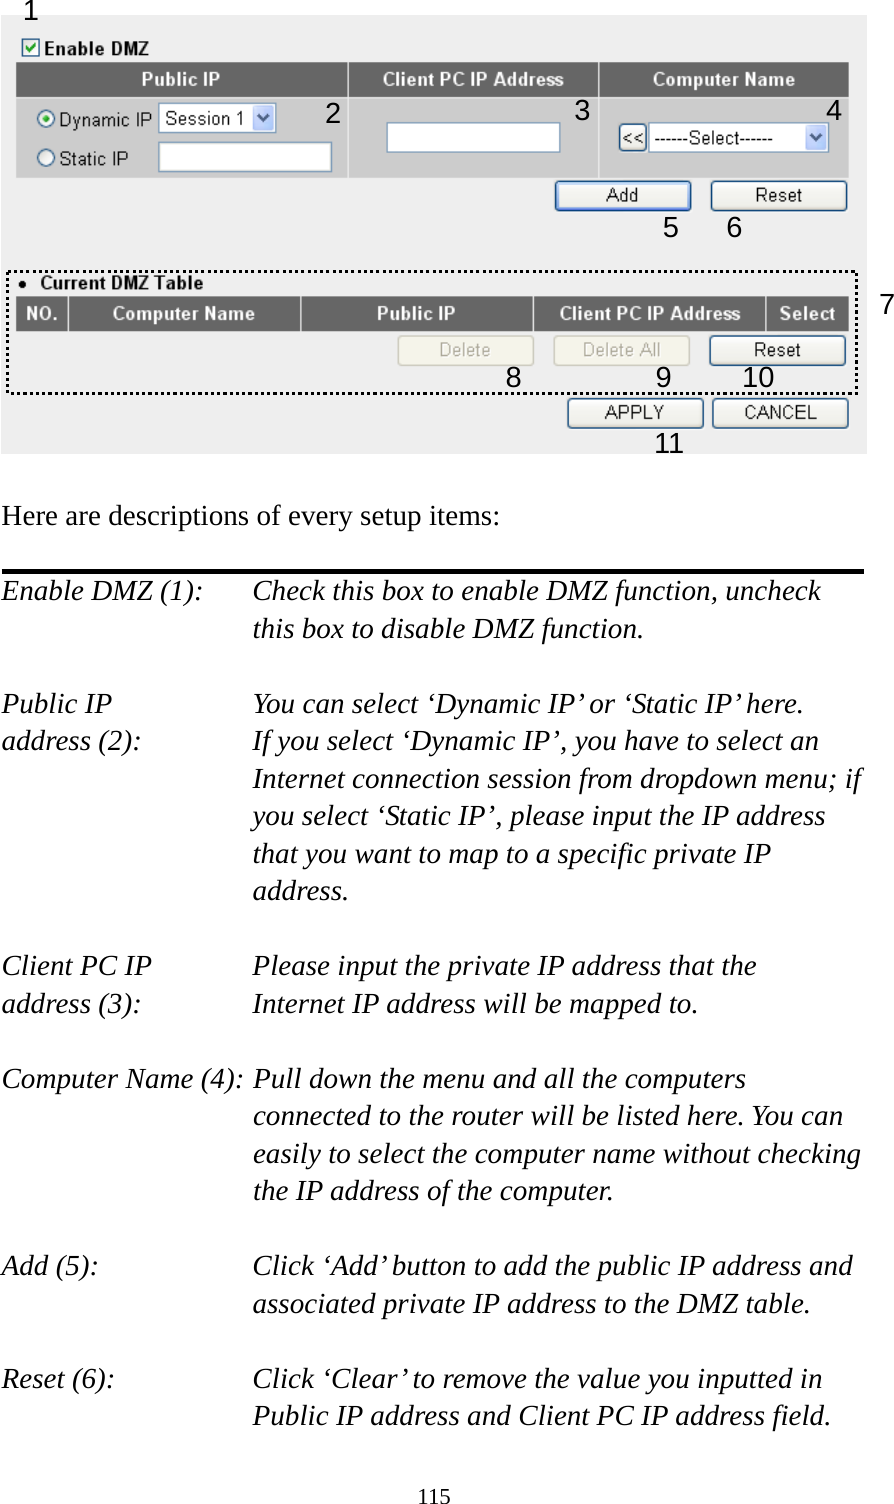 115   Here are descriptions of every setup items:  Enable DMZ (1):    Check this box to enable DMZ function, uncheck this box to disable DMZ function.  Public IP        You can select ‘Dynamic IP’ or ‘Static IP’ here. address (2):    If you select ‘Dynamic IP’, you have to select an Internet connection session from dropdown menu; if you select ‘Static IP’, please input the IP address that you want to map to a specific private IP address.  Client PC IP      Please input the private IP address that the address (3):      Internet IP address will be mapped to.  Computer Name (4): Pull down the menu and all the computers connected to the router will be listed here. You can easily to select the computer name without checking the IP address of the computer.  Add (5):    Click ‘Add’ button to add the public IP address and associated private IP address to the DMZ table.  Reset (6):    Click ‘Clear’ to remove the value you inputted in Public IP address and Client PC IP address field. 1 2456 78 9 10 113